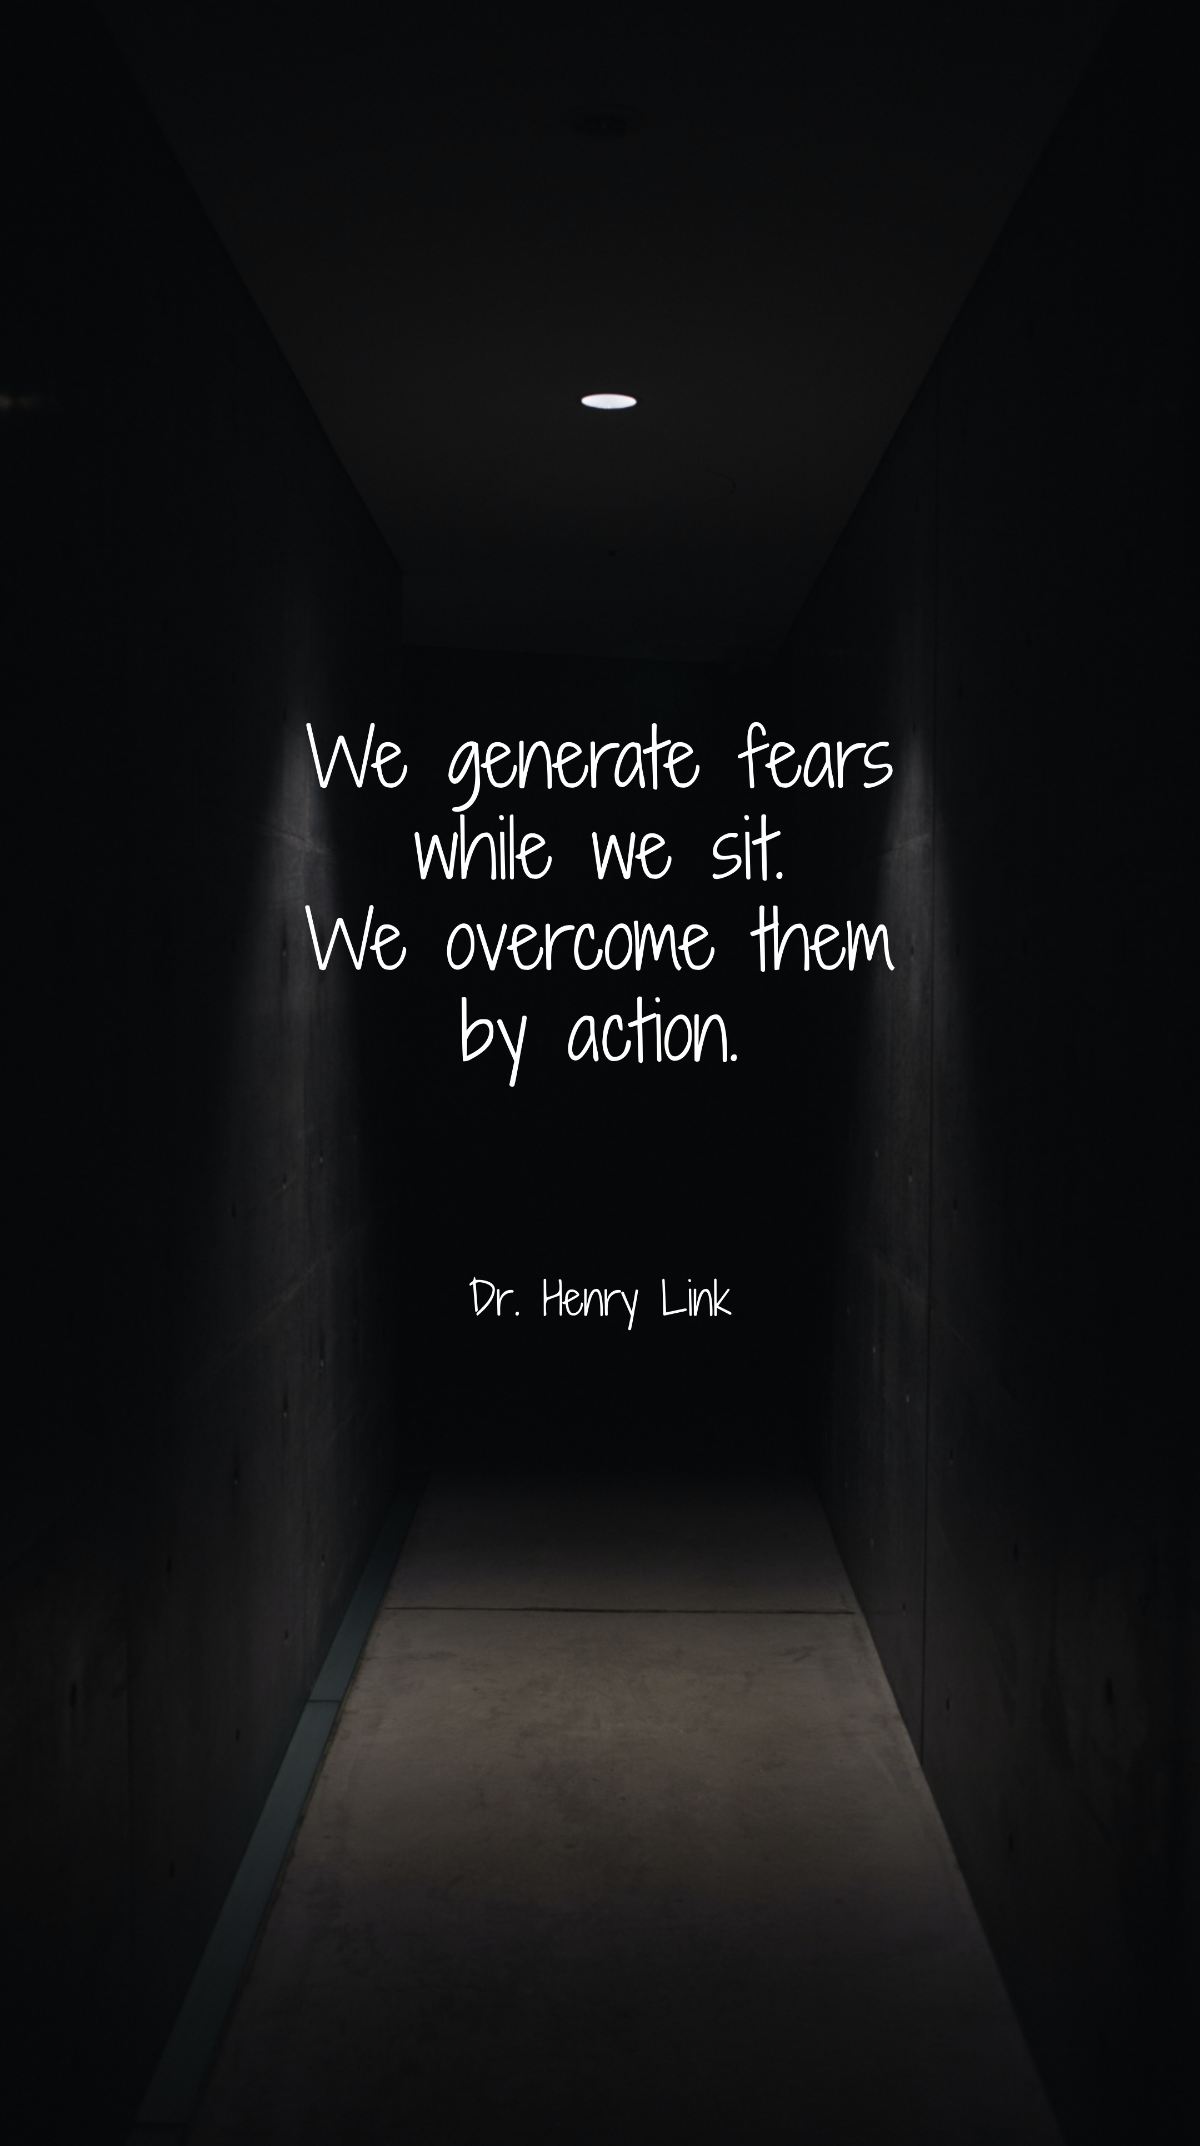 Dr. Henry Link - We generate fears while we sit. We overcome them by action